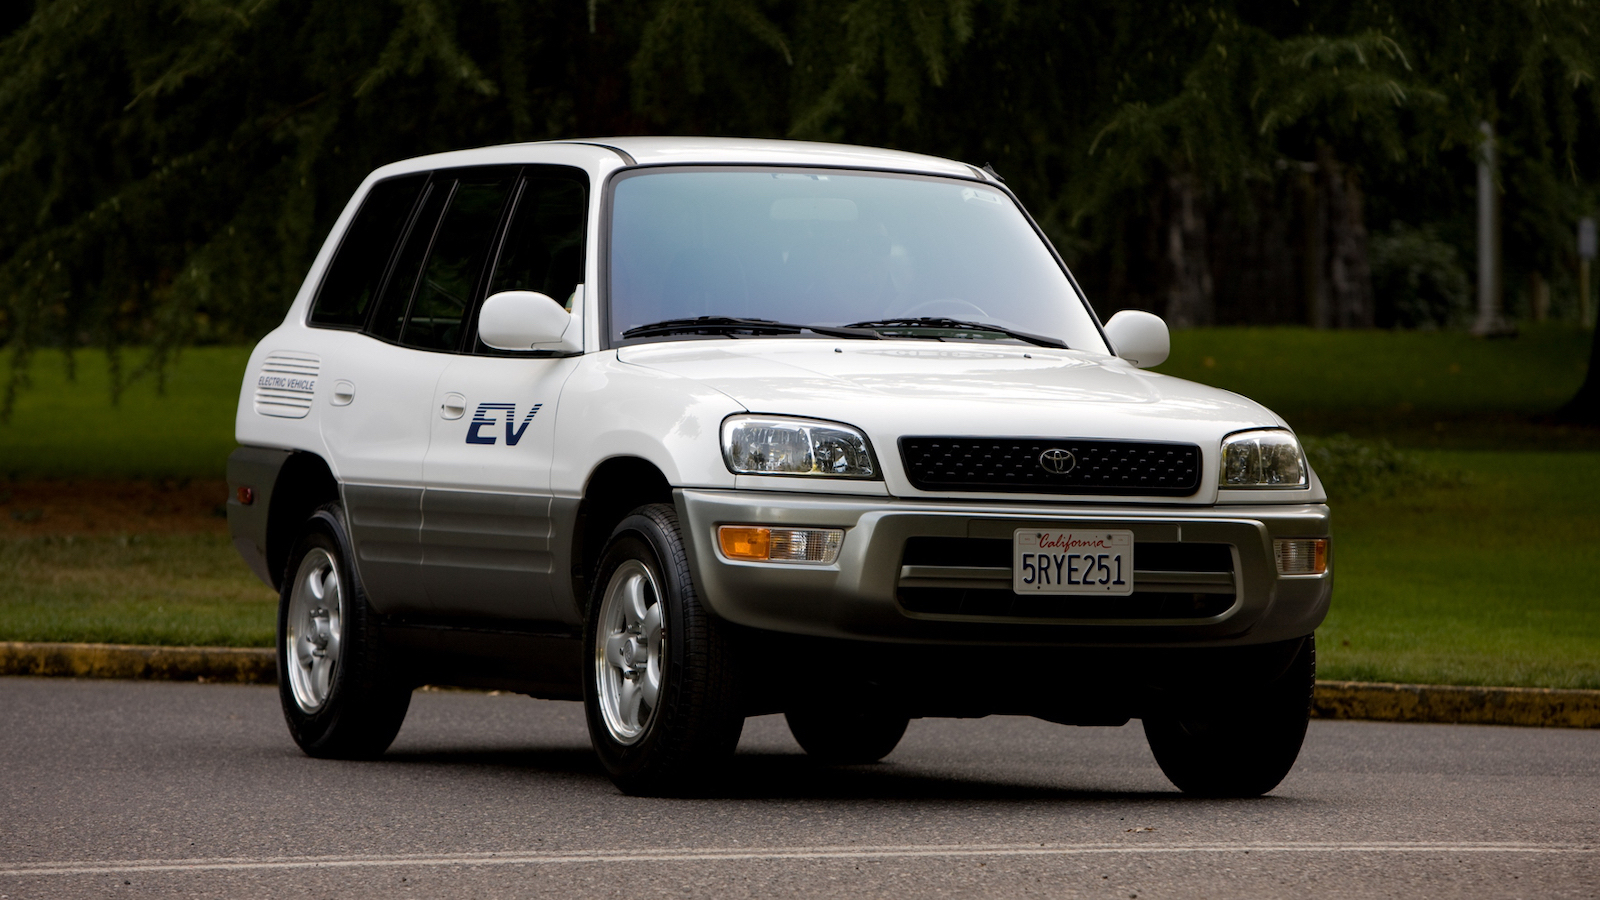 The RAV4 EV could have brought electric power to the mainstream | Top Gear